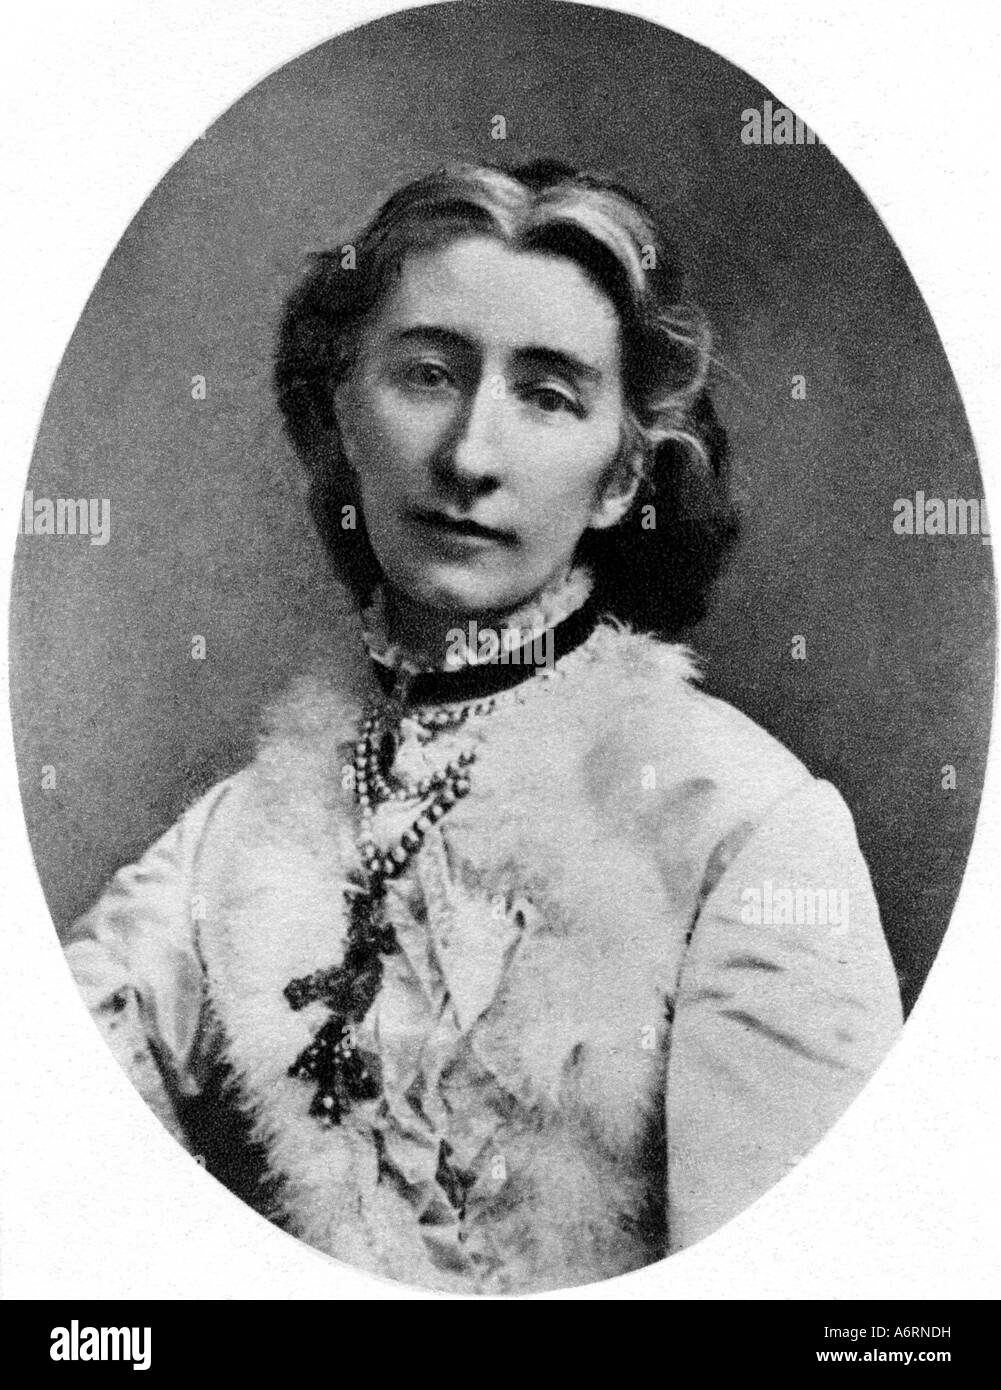 Wagner, Cosima, 24.12.1837 - 1.4.1930, German festival manager, wife of Richard Wagner, Photographie, 20th century, Cosima Liszt Stock Photo